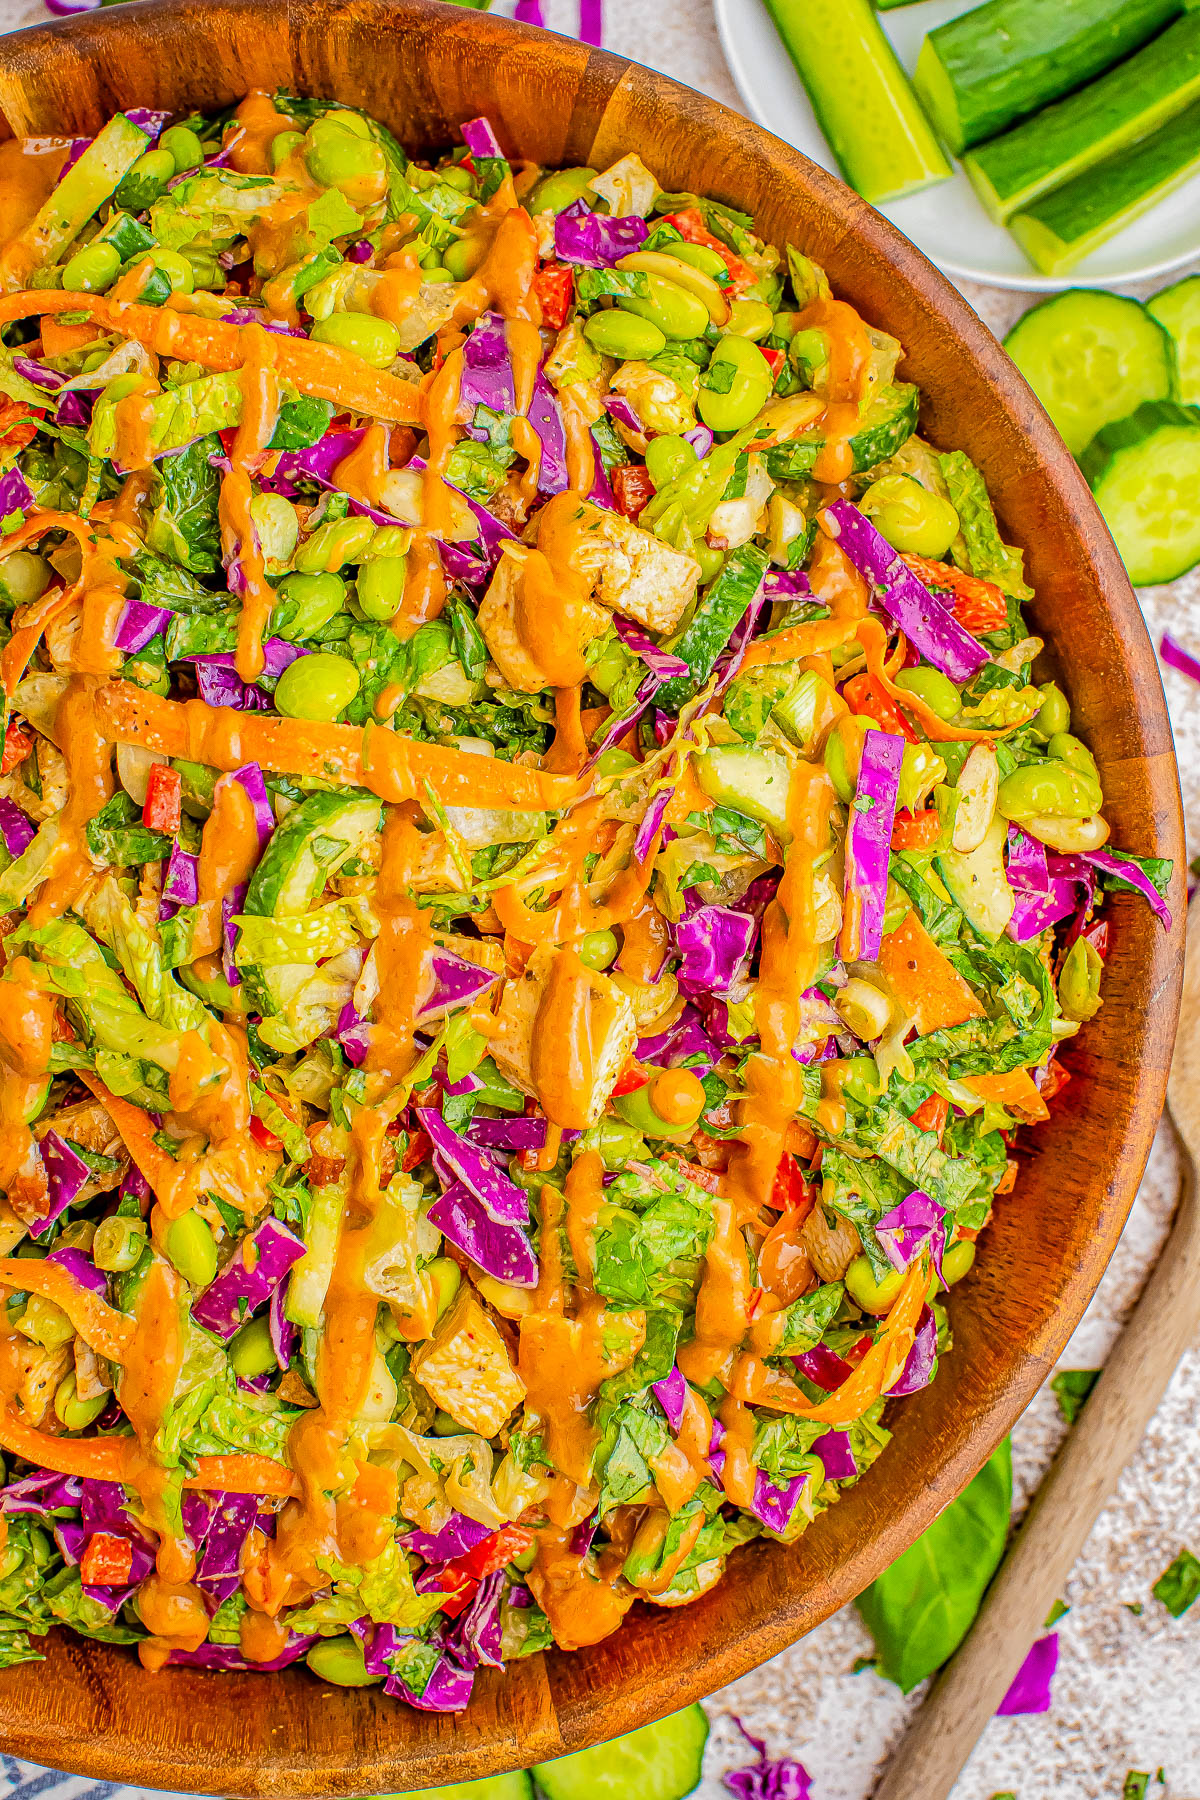 A wooden bowl filled with a vibrant mixed salad featuring chopped vegetables and a drizzle of orange dressing. Slices of cucumber and chopped vegetables are visible in the background.